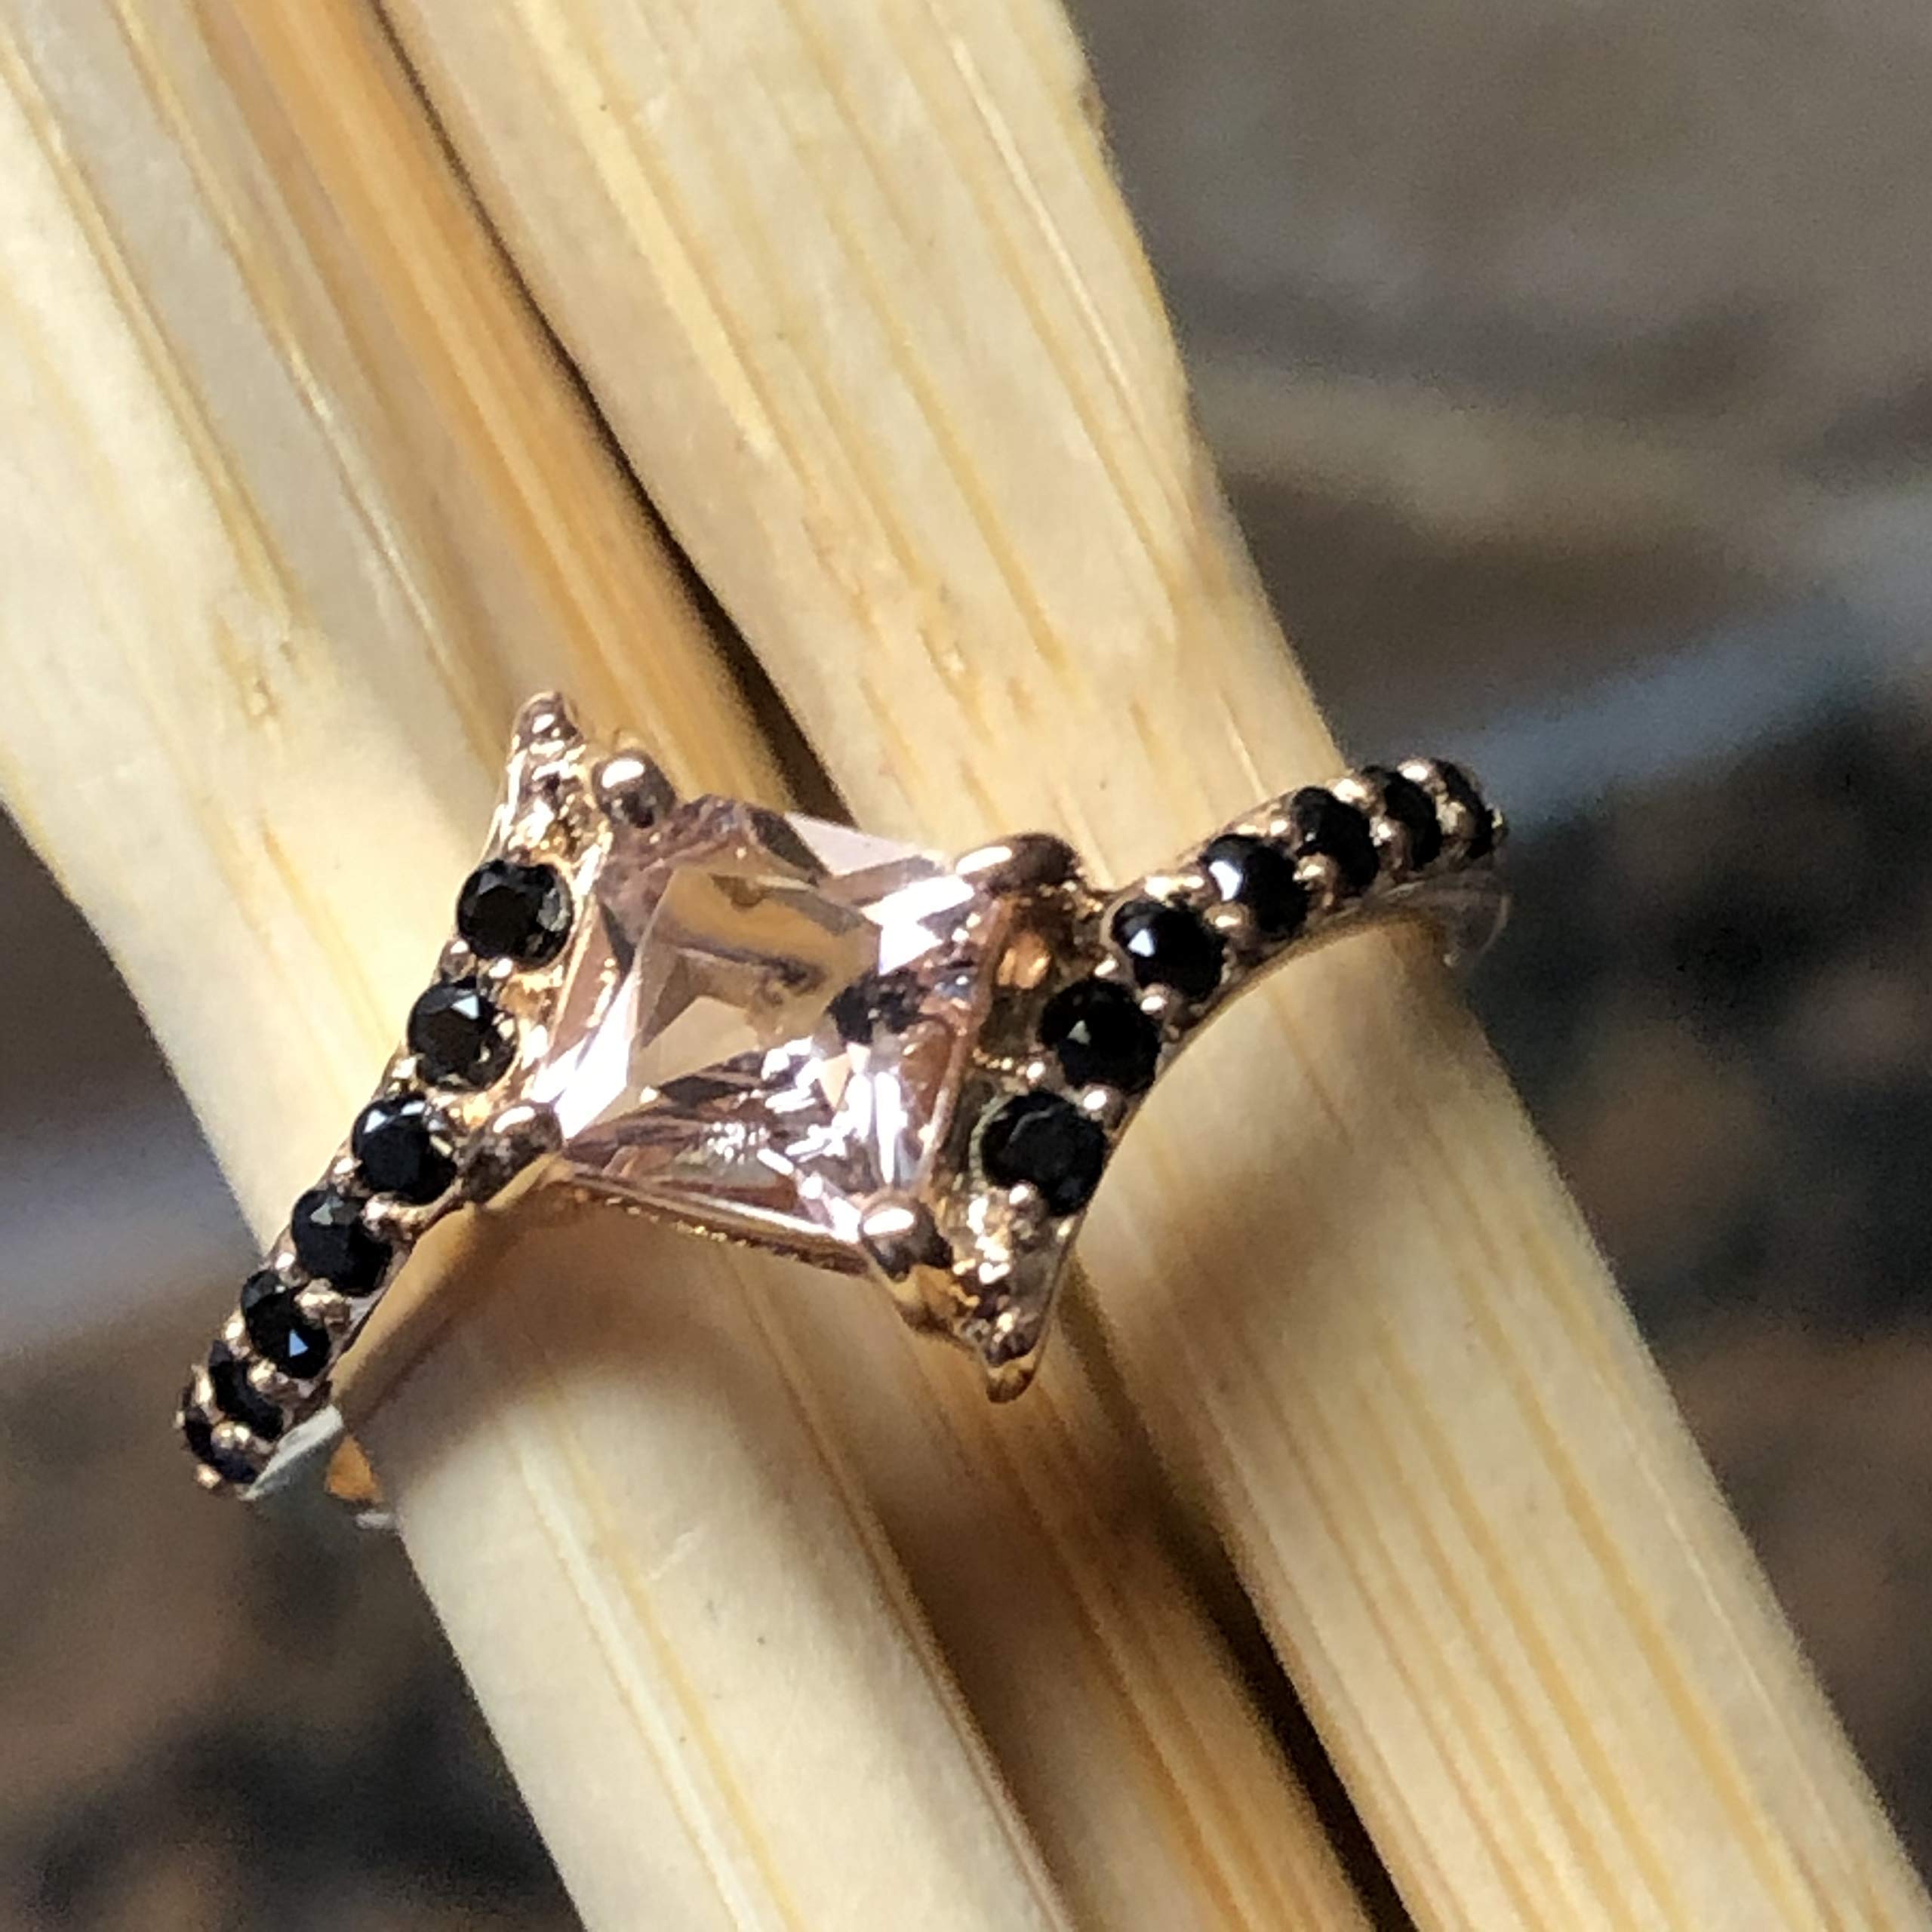 Natural 1ct Peach Morganite, Spinel 14k Rose Gold Over Sterling Silver Engagement Ring Size 7, 8 - Natural Rocks by Kala